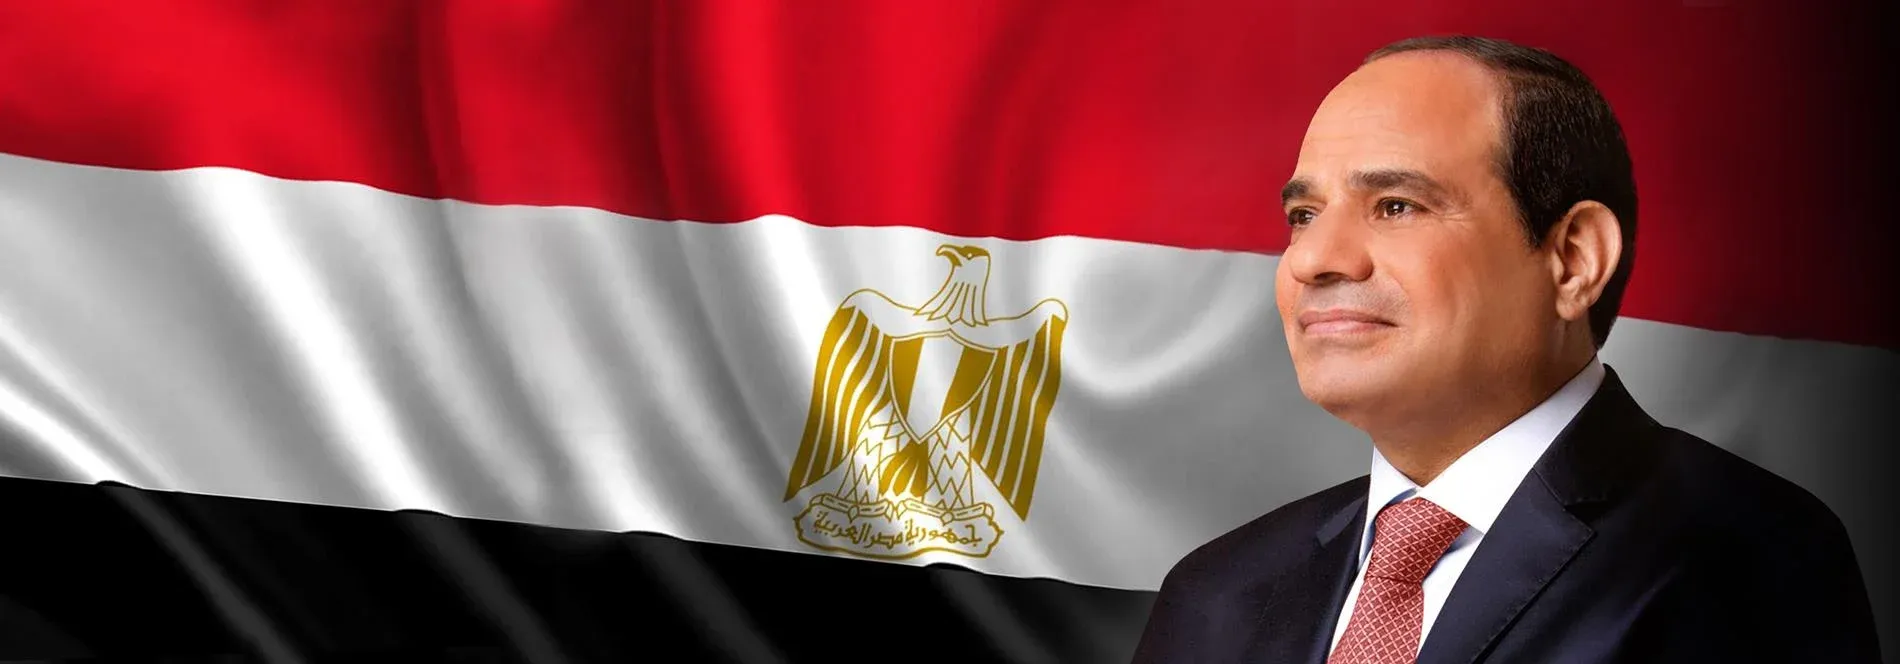 Read more about the article Egypt: President Abdel Fattah al-Sissi Re-Elected by 89.6% Vote